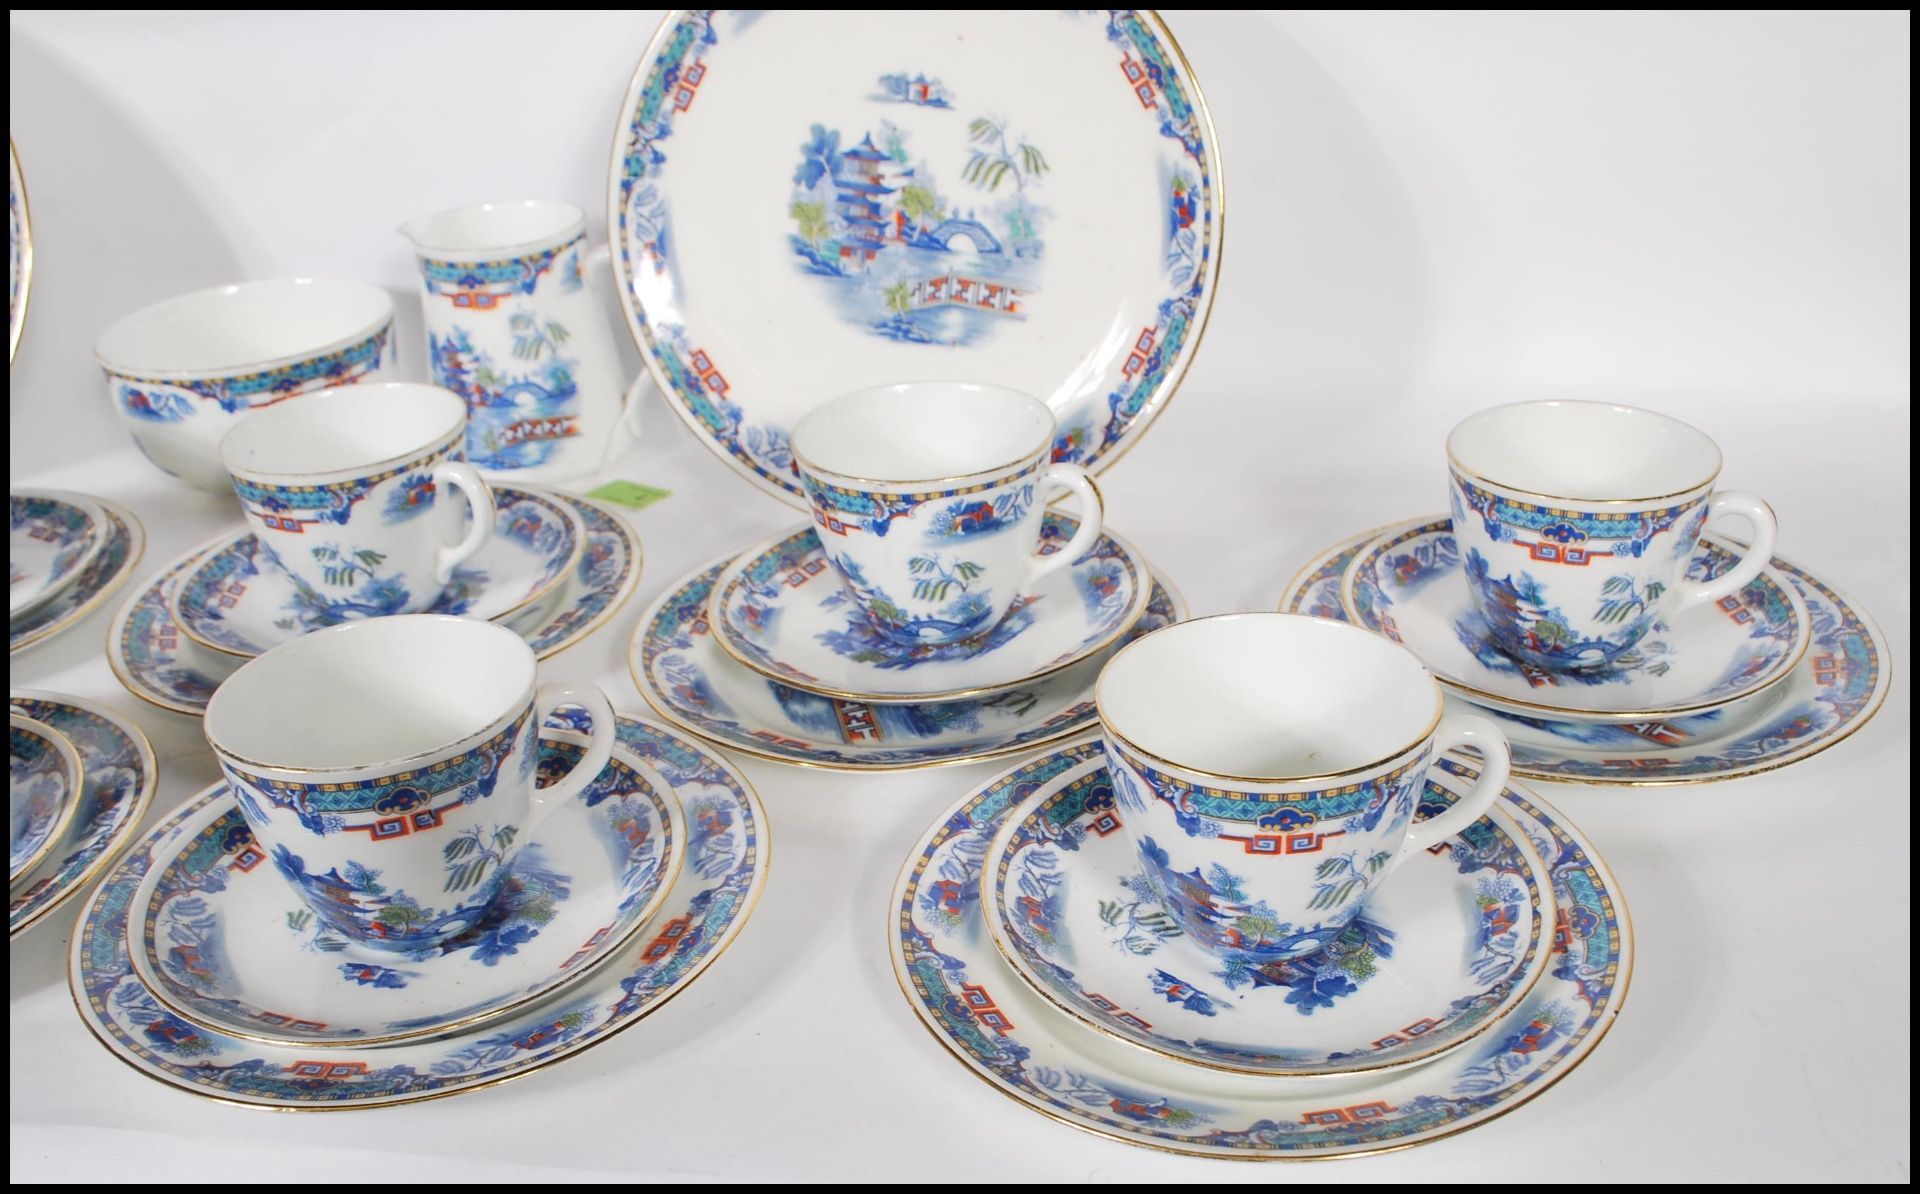 A 20th Century Staffordshire blue and white tea service in the Willow pattern, having red and - Image 7 of 8